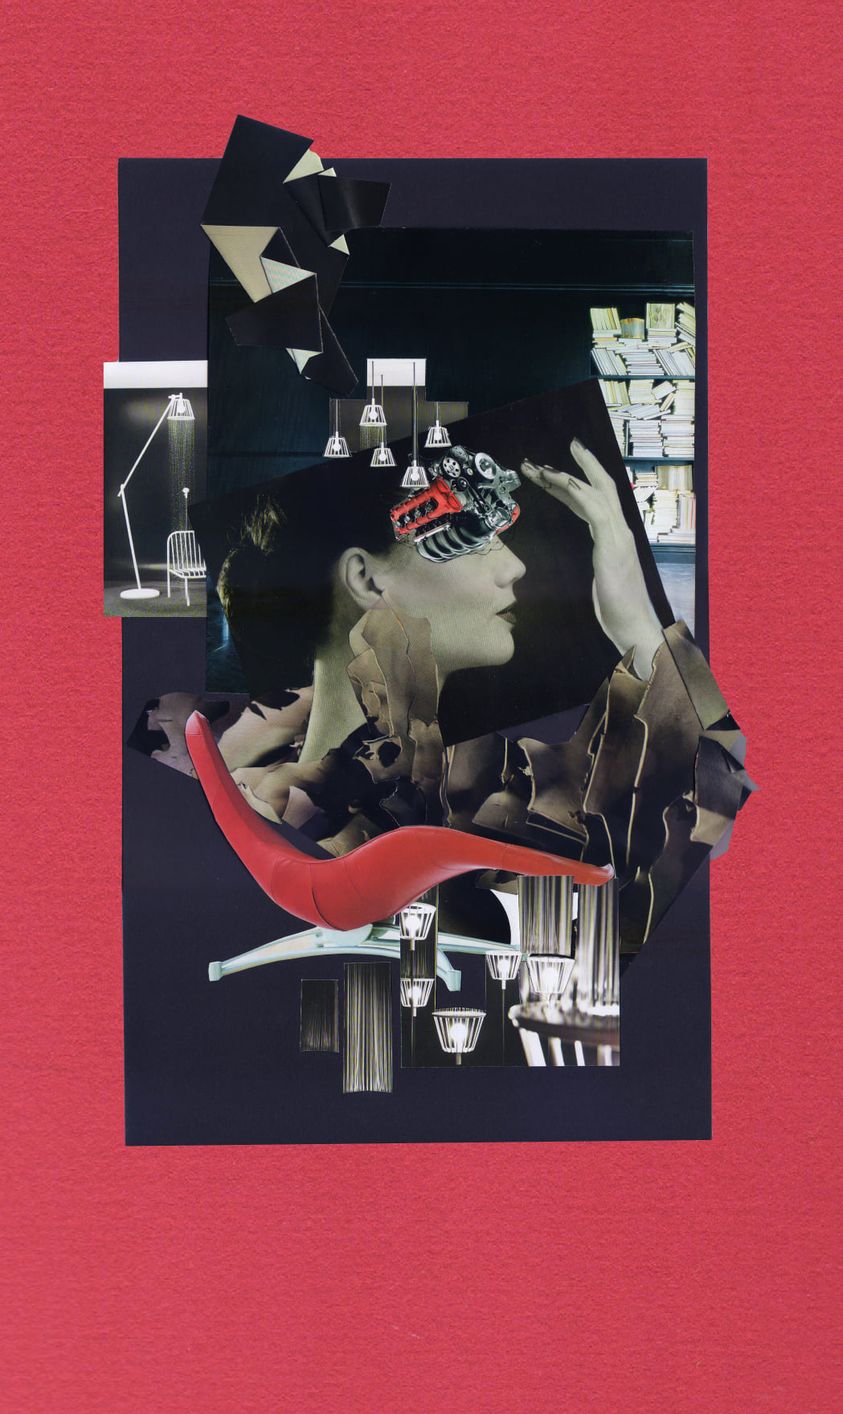 «The World of Art through the Lens of Collage», by Lena Letina, a collage artist from Kyiv